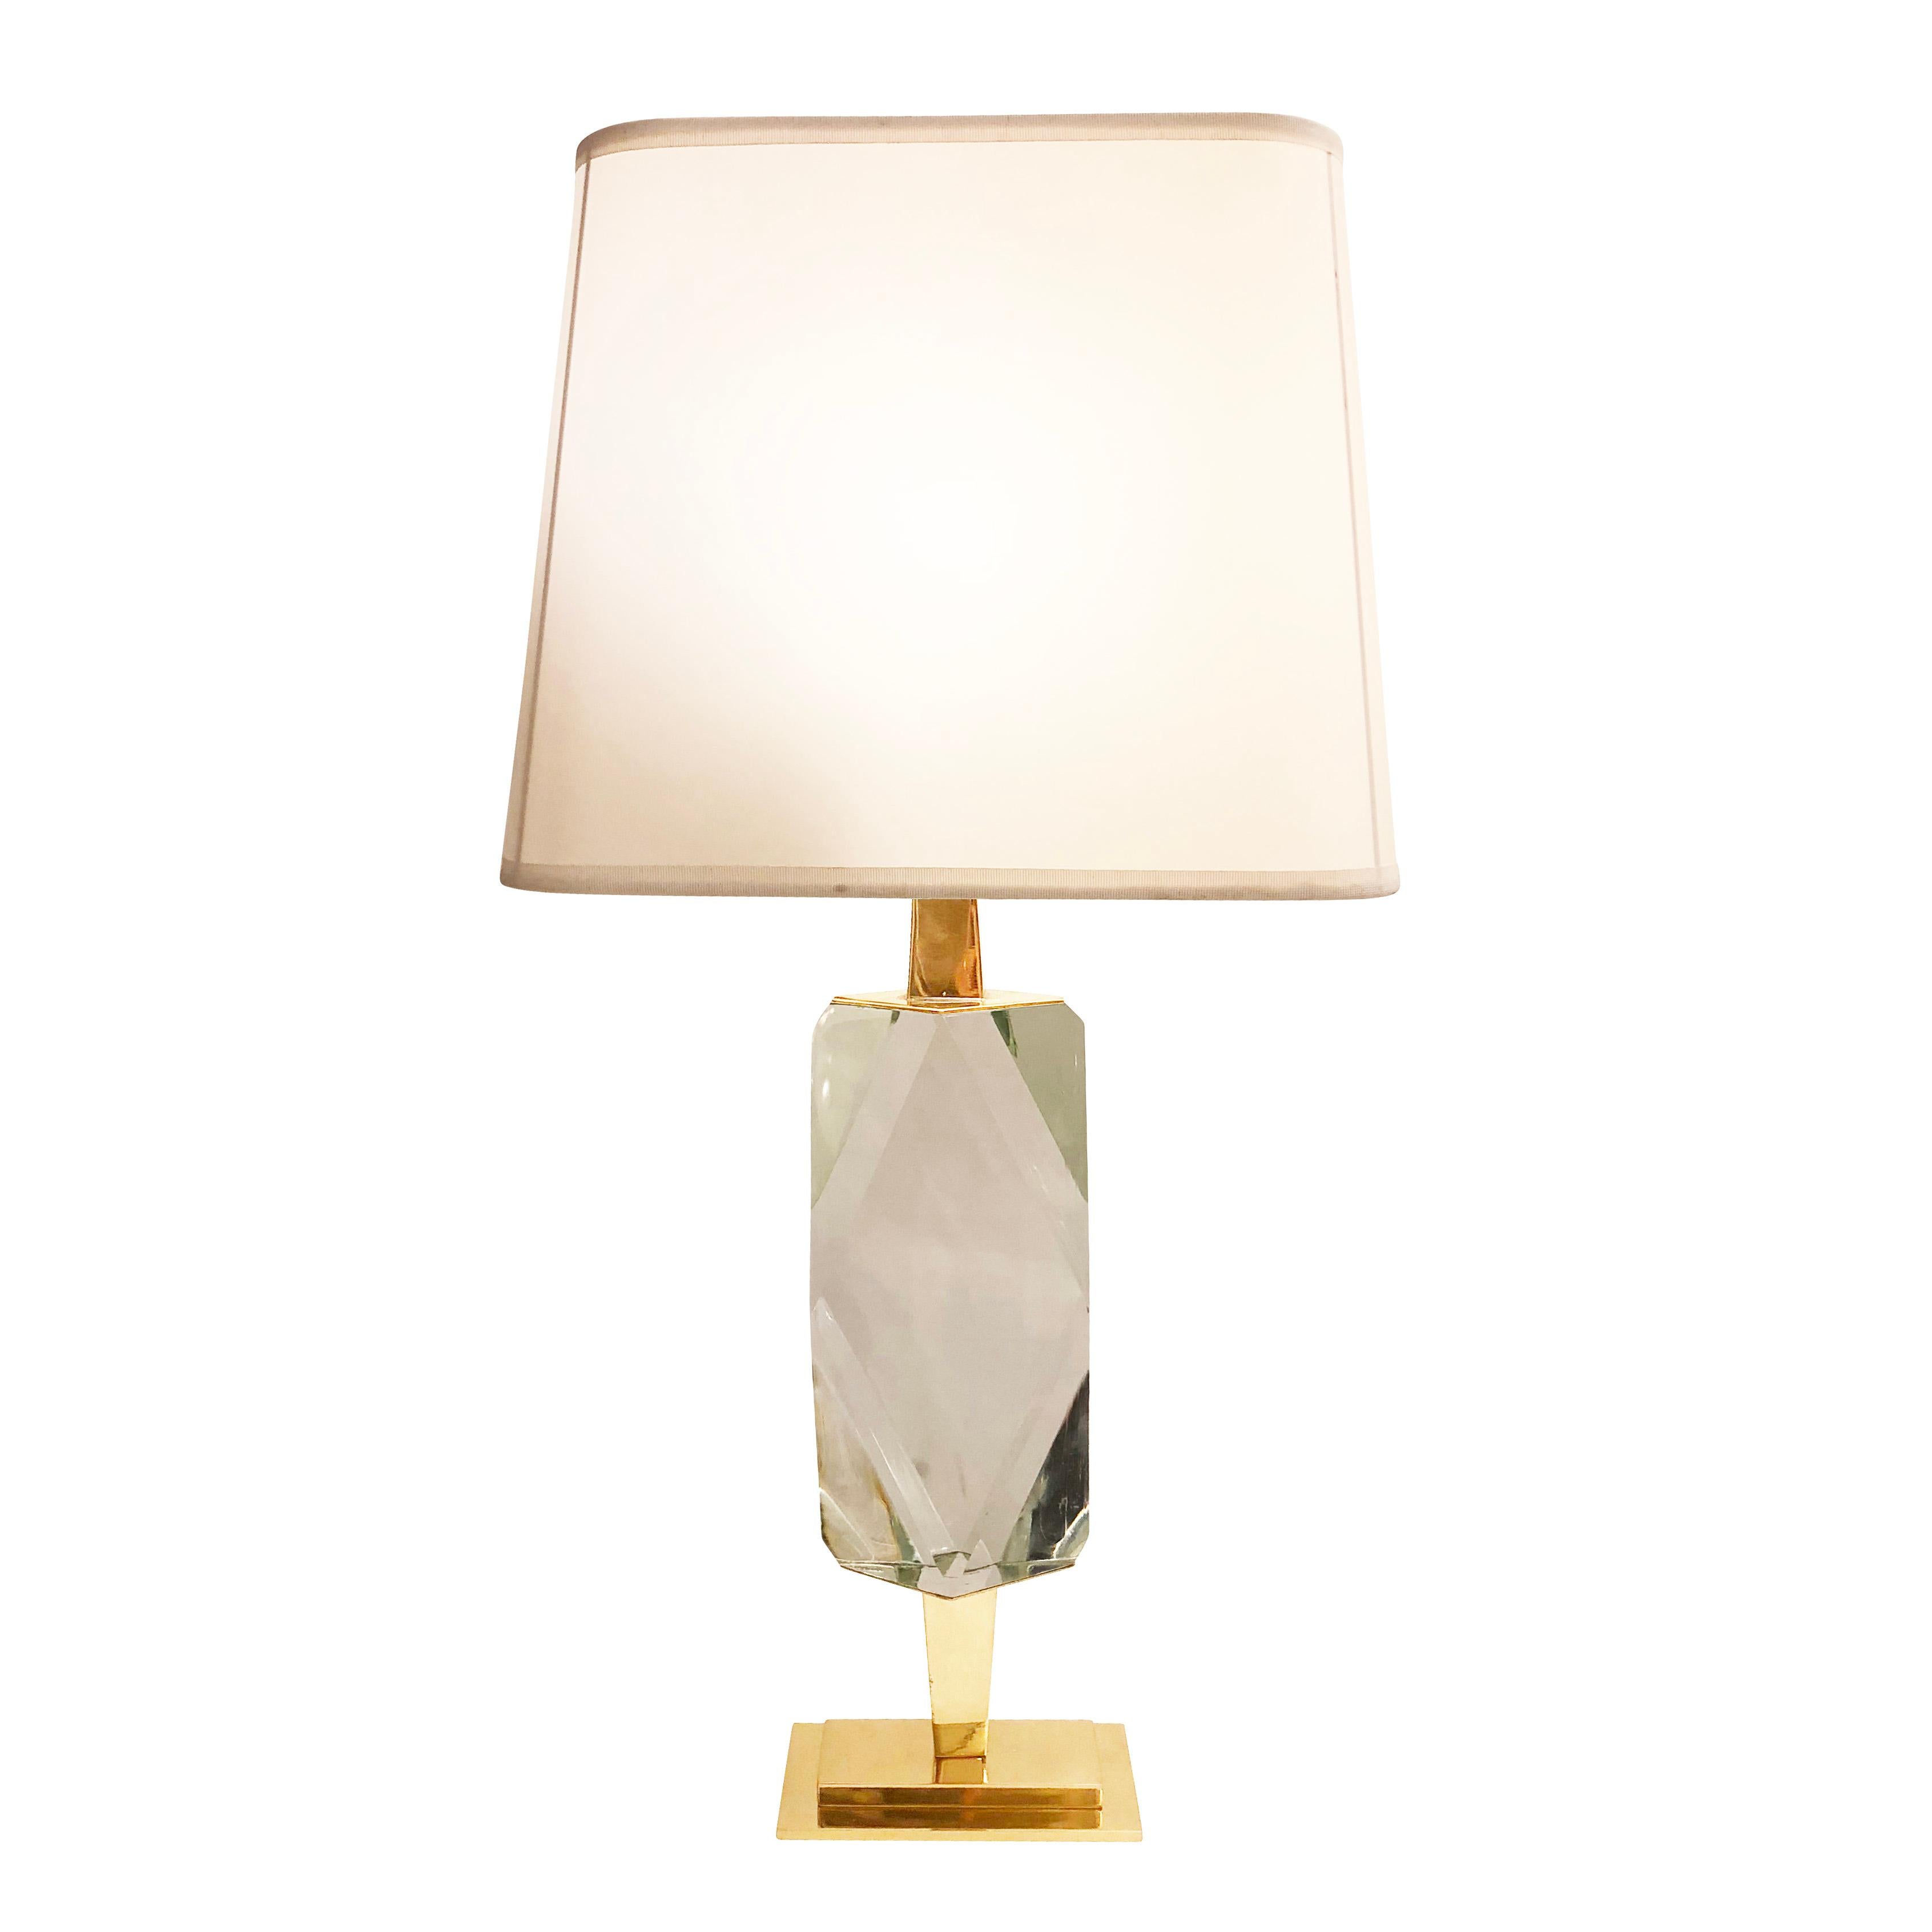 Prisma table lamp designed by Gaspare Asaro for his contemporary collection formA, featuring a hand cut faceted glass and brass hardware. A shorter version without the base is also available (see last image). Finish of hardware can be customized as